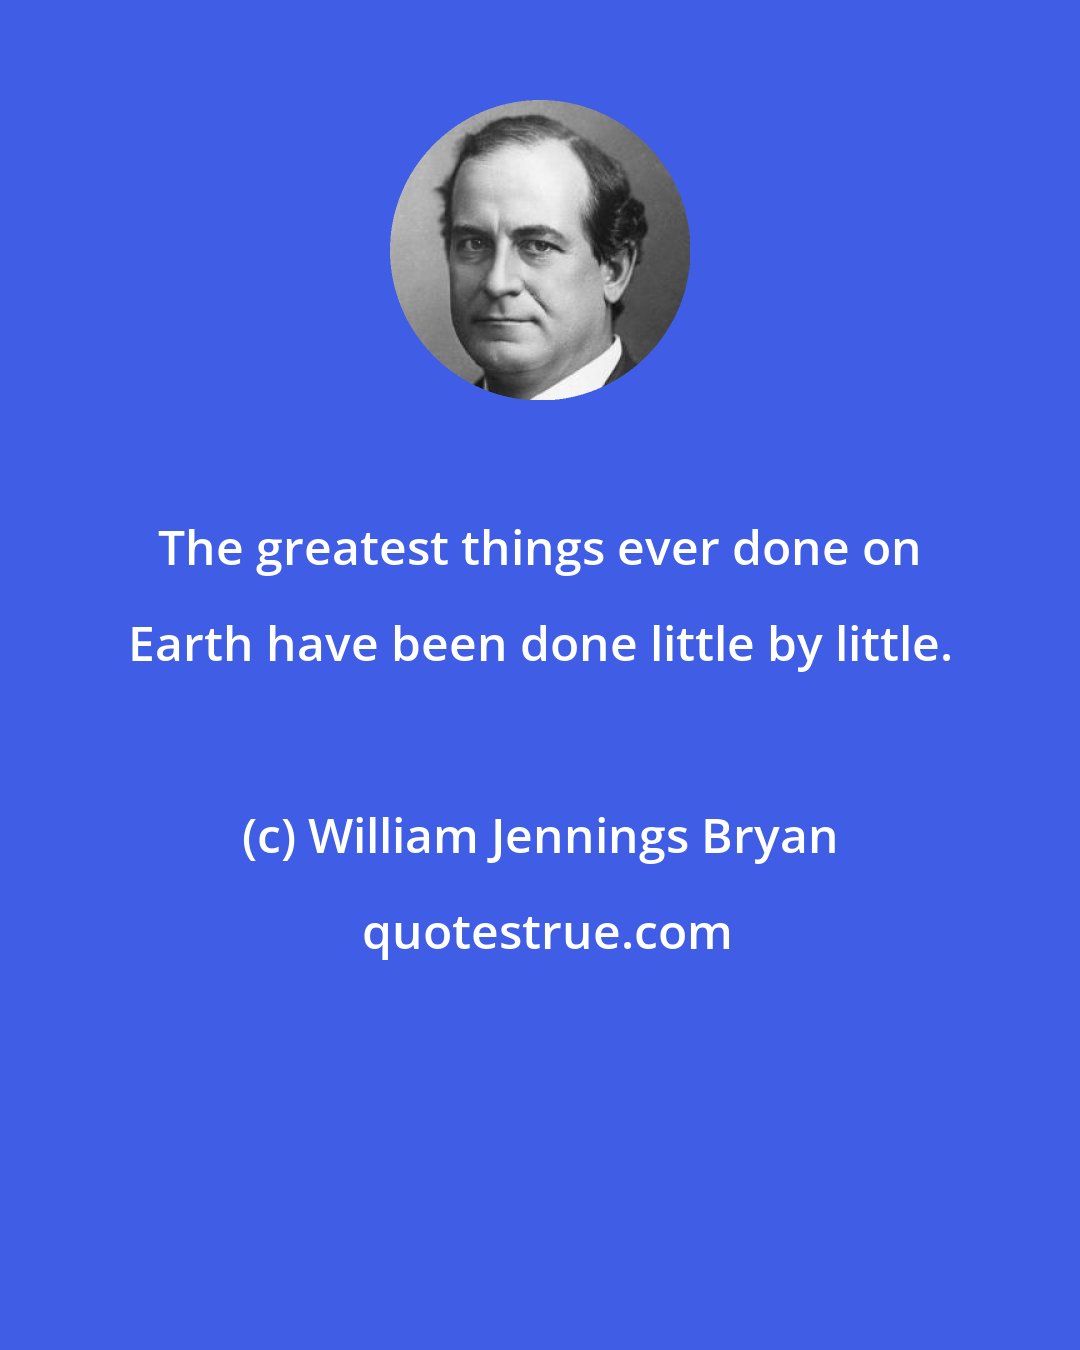 William Jennings Bryan: The greatest things ever done on Earth have been done little by little.